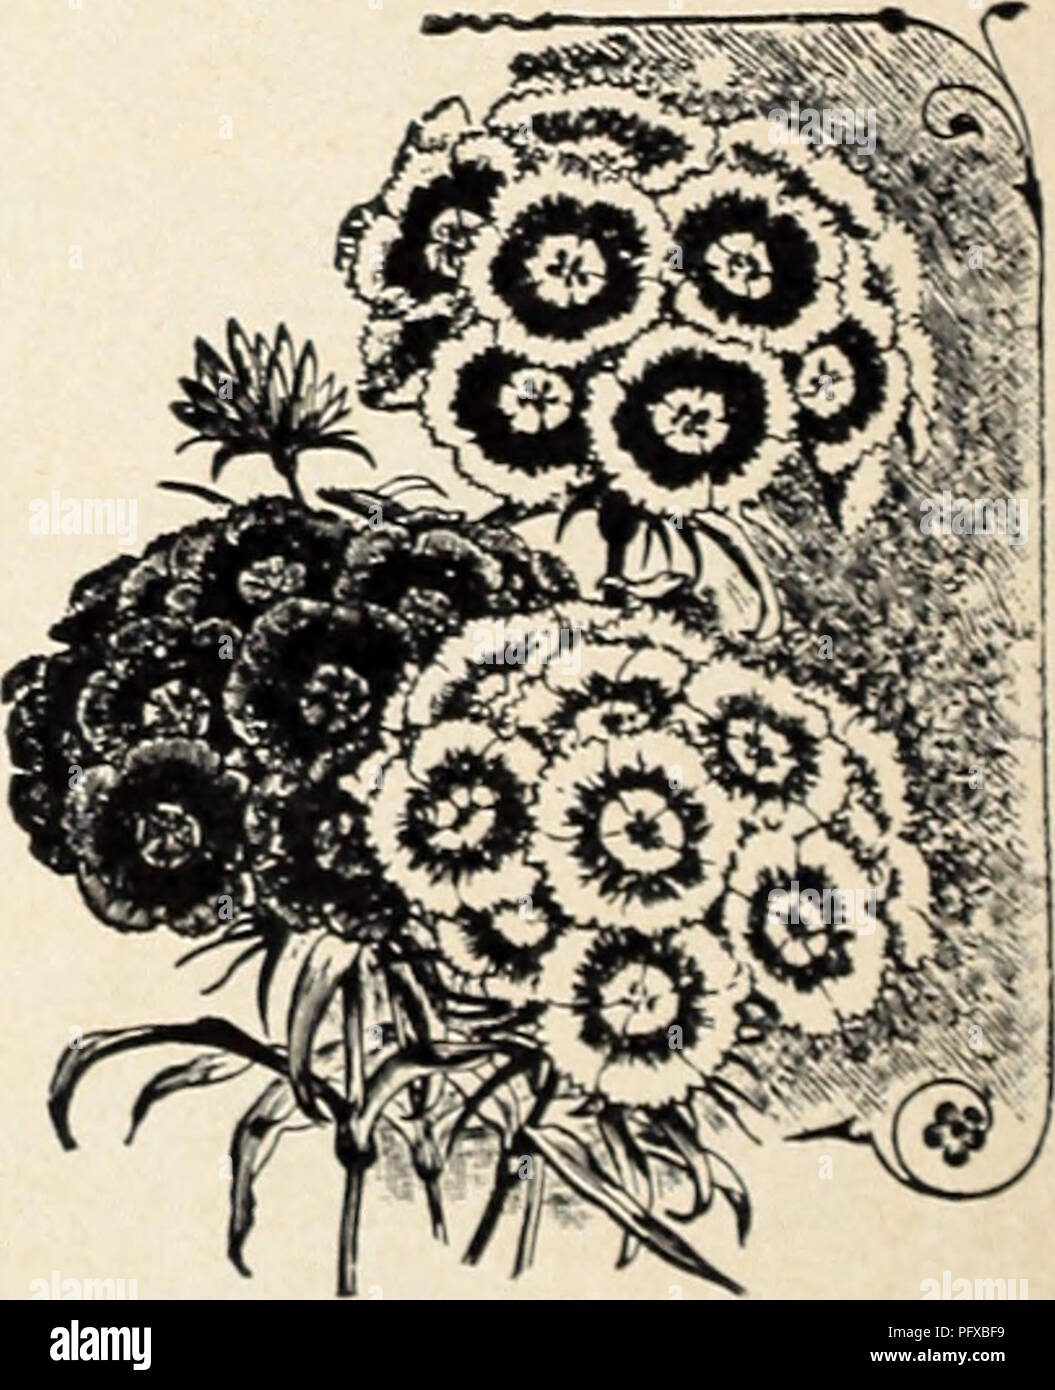 . Currie's garden annual. Flowers Seeds Catalogs; Bulbs (Plants) Seeds Catalogs; Vegetables Seeds Catalogs; Nurseries (Horticulture) Catalogs; Plants, Ornamental Catalogs; Gardening Equipment and supplies Catalogs. STATICE (Sea Lovender) LATIFOLIA —Tufts of leathery leaves, large heads of purplish- blue flowers. Plants, 25e; dox., $2.50; seeds, Pkt., 10c. DUMOSA—Densely packed cush- ions of silvery gray flowers, thickly covered with blossoms. 2 ft. Pkt., 25e. STOKESIA (Cornflower or Stoke's Aster) IS&quot; to 24&quot; high. Hondsome Cen- taurea-like lavender blossoms, each measurino from 4&quo Stock Photo